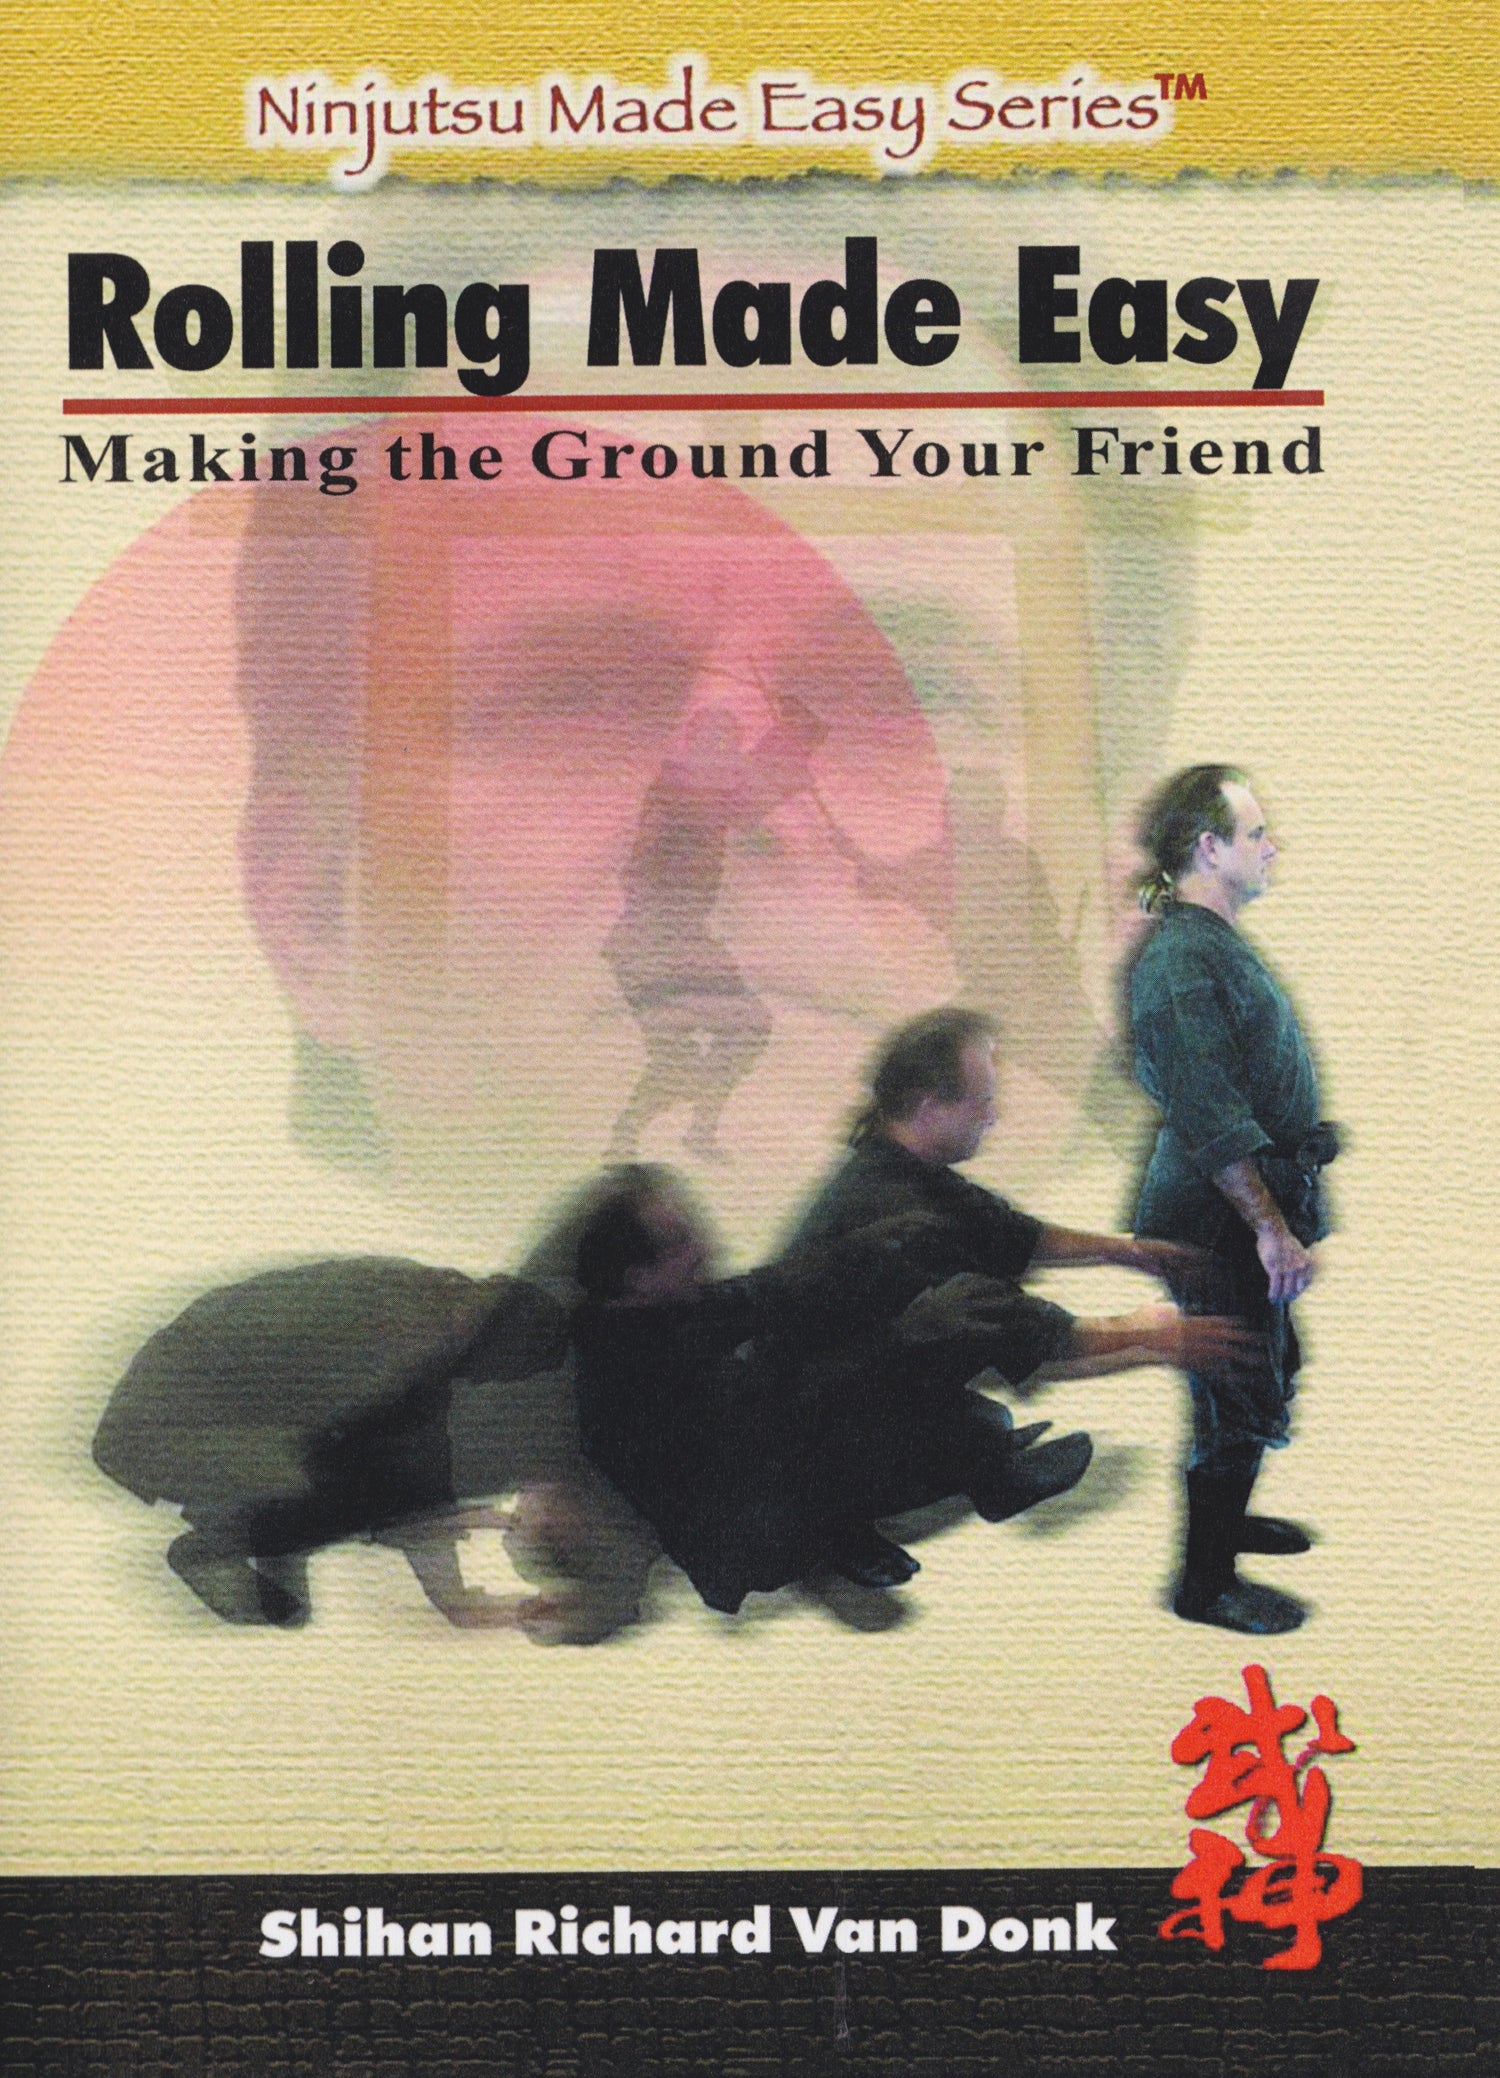 Rolling Made Easy DVD by Richard Van Donk